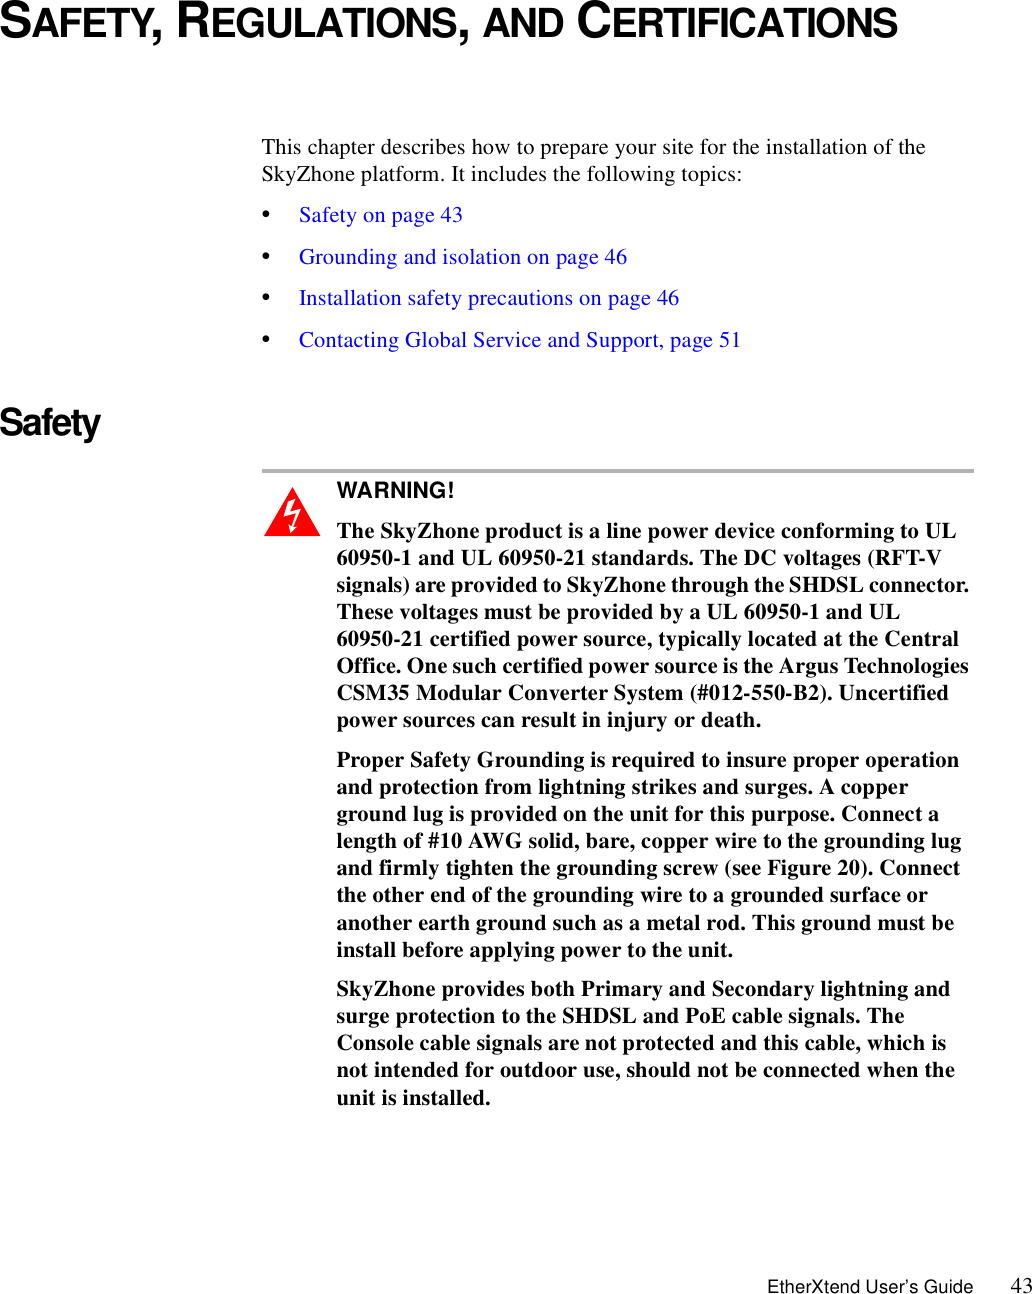 EtherXtend User’s Guide 43SAFETY, REGULATIONS, AND CERTIFICATIONSThis chapter describes how to prepare your site for the installation of the SkyZhone platform. It includes the following topics:•Safety on page 43•Grounding and isolation on page 46•Installation safety precautions on page 46•Contacting Global Service and Support, page 51Safety WARNING!  The SkyZhone product is a line power device conforming to UL 60950-1 and UL 60950-21 standards. The DC voltages (RFT-V signals) are provided to SkyZhone through the SHDSL connector. These voltages must be provided by a UL 60950-1 and UL 60950-21 certified power source, typically located at the Central Office. One such certified power source is the Argus Technologies CSM35 Modular Converter System (#012-550-B2). Uncertified power sources can result in injury or death.Proper Safety Grounding is required to insure proper operation and protection from lightning strikes and surges. A copper ground lug is provided on the unit for this purpose. Connect a length of #10 AWG solid, bare, copper wire to the grounding lug and firmly tighten the grounding screw (see Figure 20). Connect the other end of the grounding wire to a grounded surface or another earth ground such as a metal rod. This ground must be install before applying power to the unit.SkyZhone provides both Primary and Secondary lightning and surge protection to the SHDSL and PoE cable signals. The Console cable signals are not protected and this cable, which is not intended for outdoor use, should not be connected when the unit is installed.